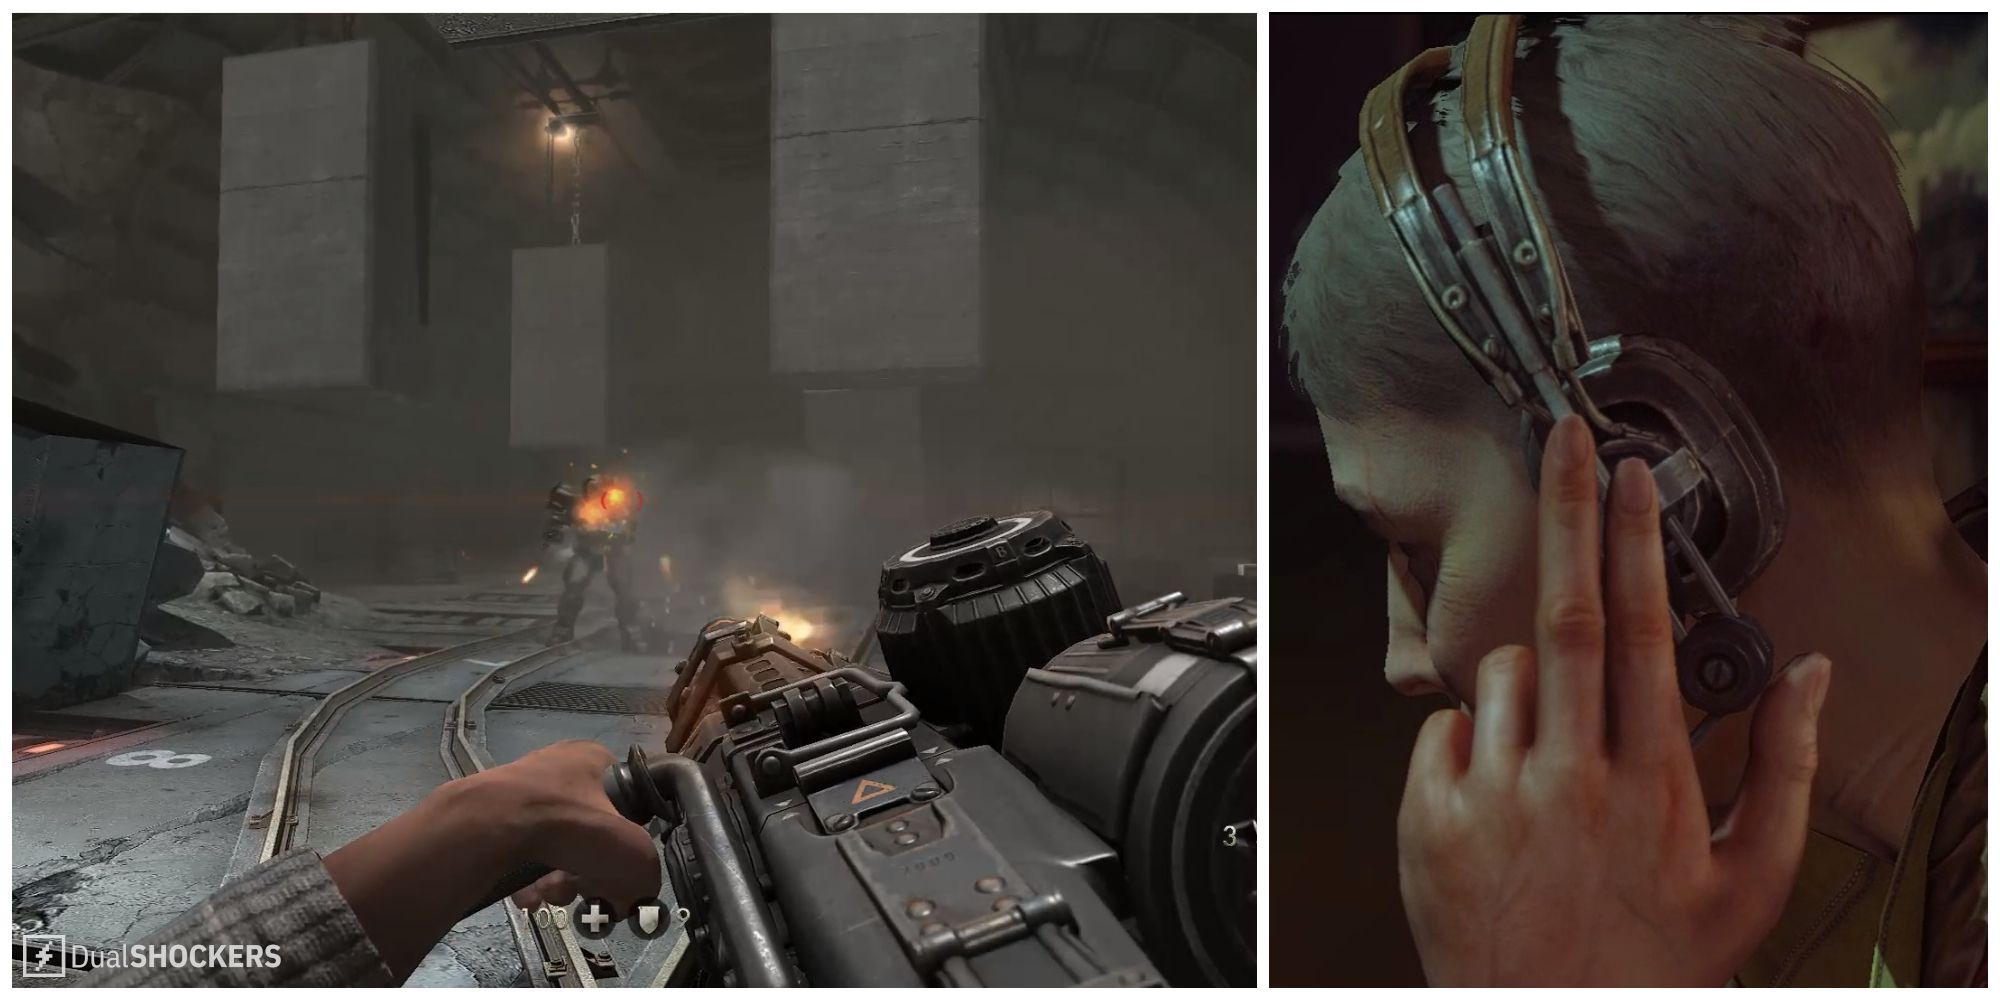 Split image of Blazkowicz in battle with an enemy robot and Caroline in Chapter 9 of Wolfenstein: The New Order.